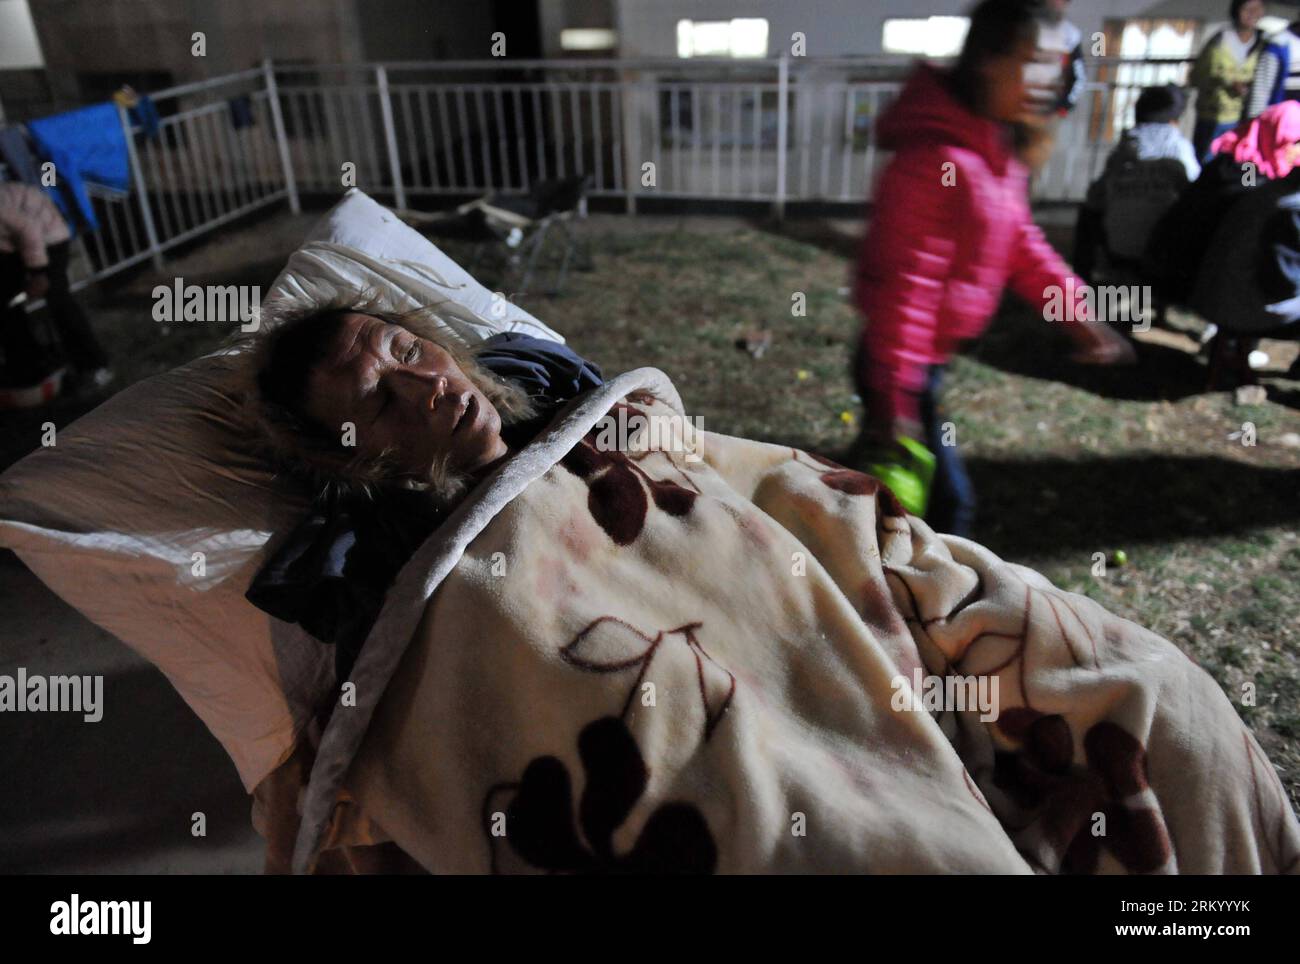 Bildnummer: 59295379  Datum: 03.03.2013  Copyright: imago/Xinhua (130303) -- ERYUAN, March 3, 2013 (Xinhua) -- An injured man waits to be treated out of a clinic after a 5.5-magnitude earthquake in Eryuan County of Dali Bai Autonomous Prefecture, southwest China s Yunnan Province, on March 3, 2013. The number of confirmed injured by a 5.5-magnitude earthquake that hit southwest China s Yunnan Province on Sunday afternoon has risen to 30, local authorities have said. (Xinhua/Lin Yiguang) (cxy) CHINA-YUNNAN-ERYUAN-EARTHQUAKE (CN) PUBLICATIONxNOTxINxCHN Gesellschaft Naturkatastrophe Erdbeben Ungl Stock Photo